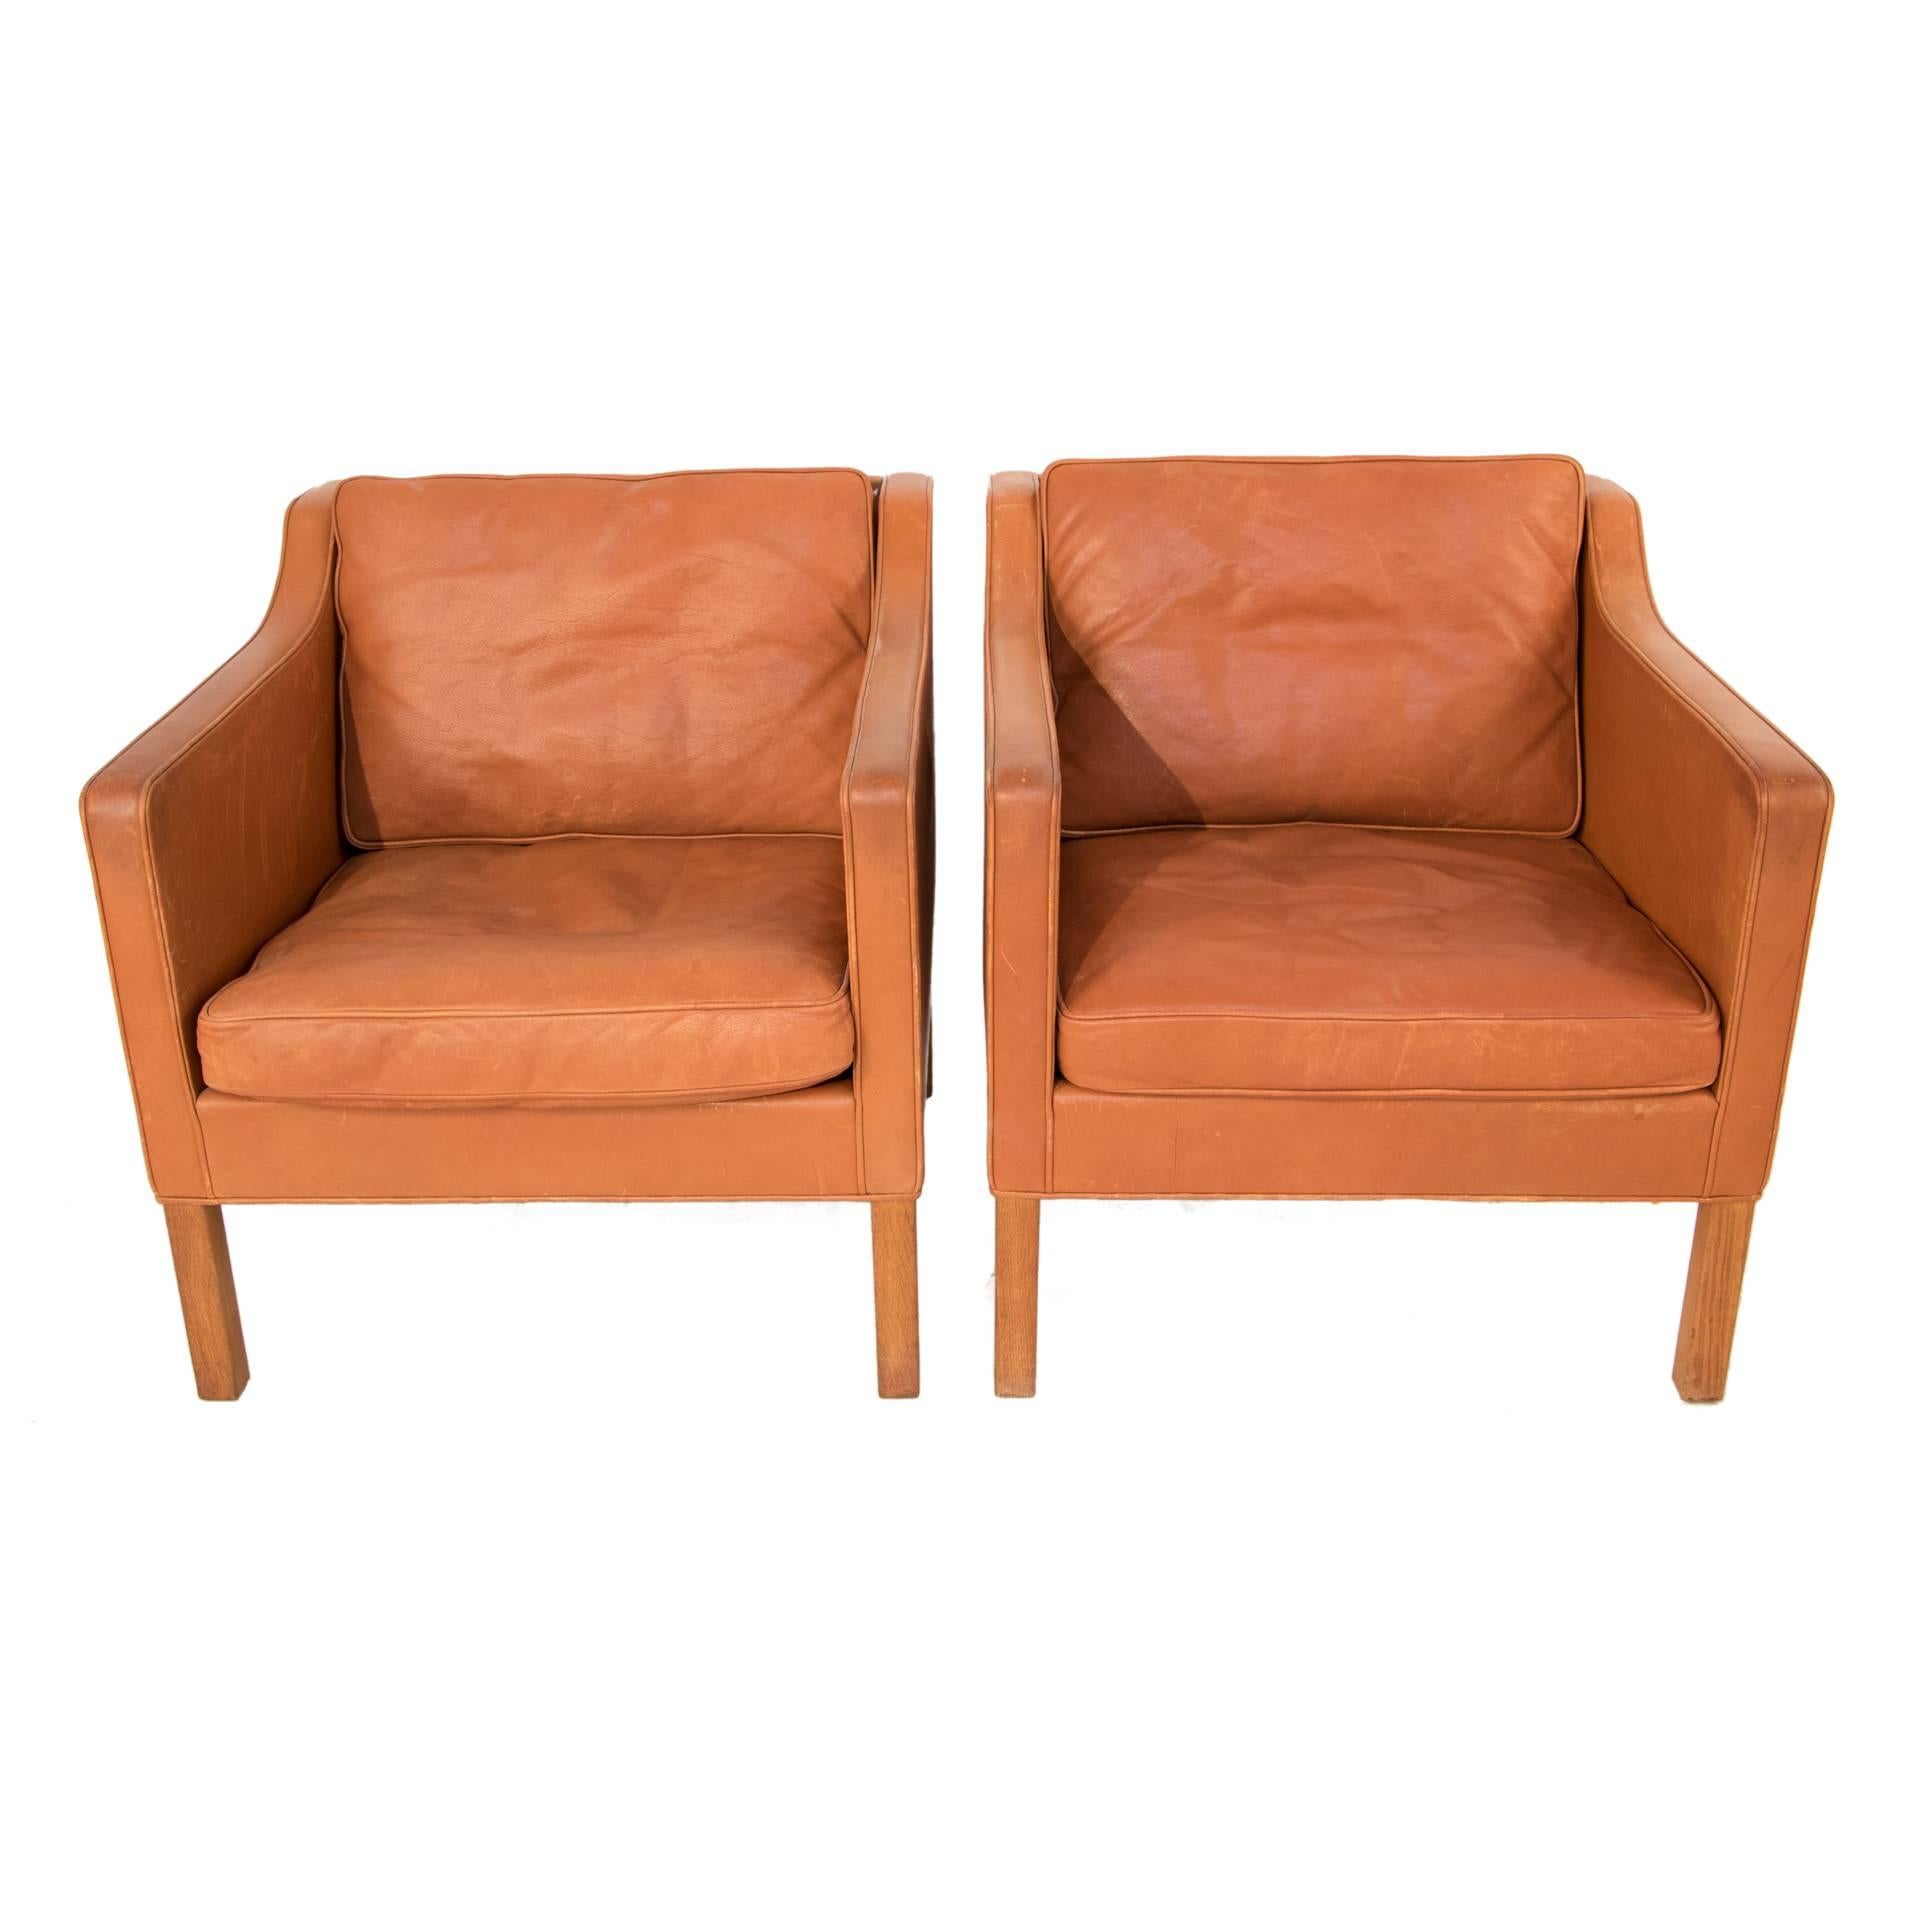 Mid-Century Modern Pair of Leather Club Chairs by Børge Mogensen